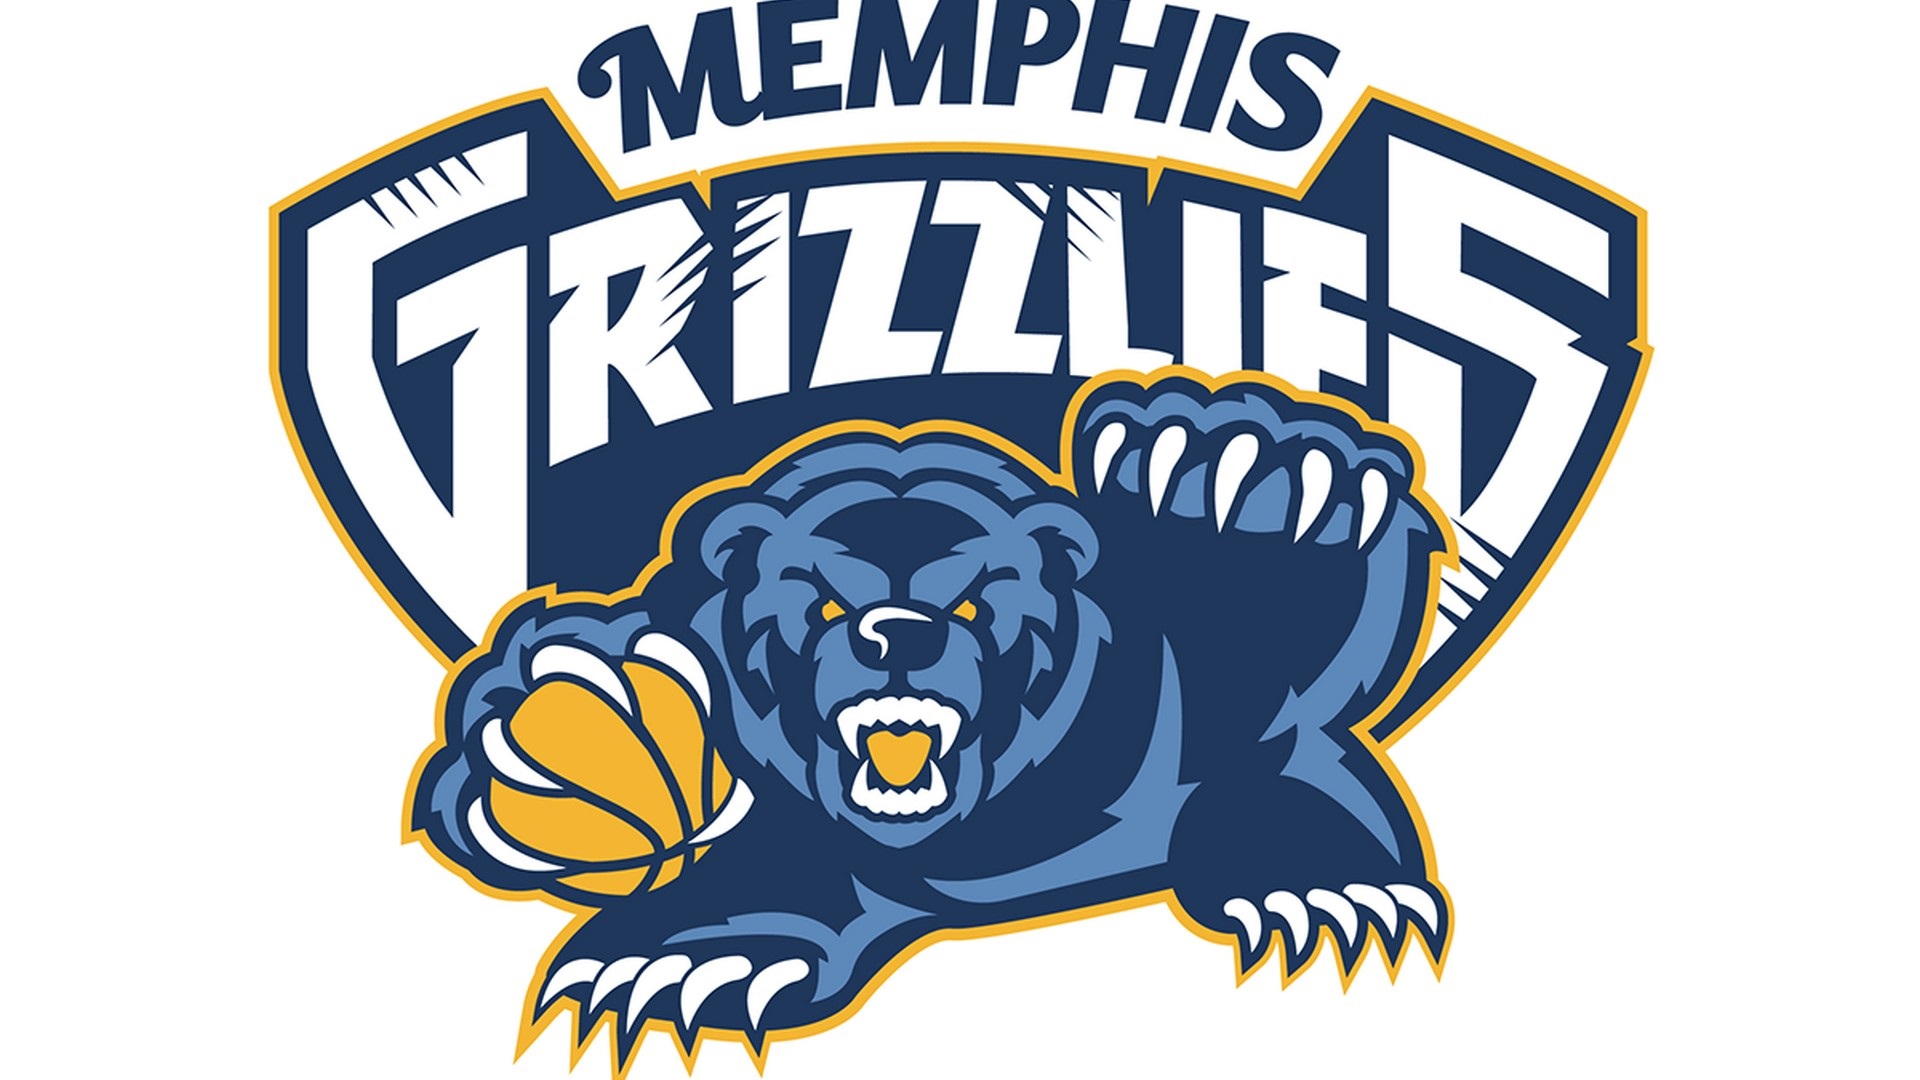 Memphis Grizzlies For PC Wallpaper with high-resolution 1920x1080 pixel. You can use this wallpaper for your Desktop Computer Backgrounds, Windows or Mac Screensavers, iPhone Lock screen, Tablet or Android and another Mobile Phone device